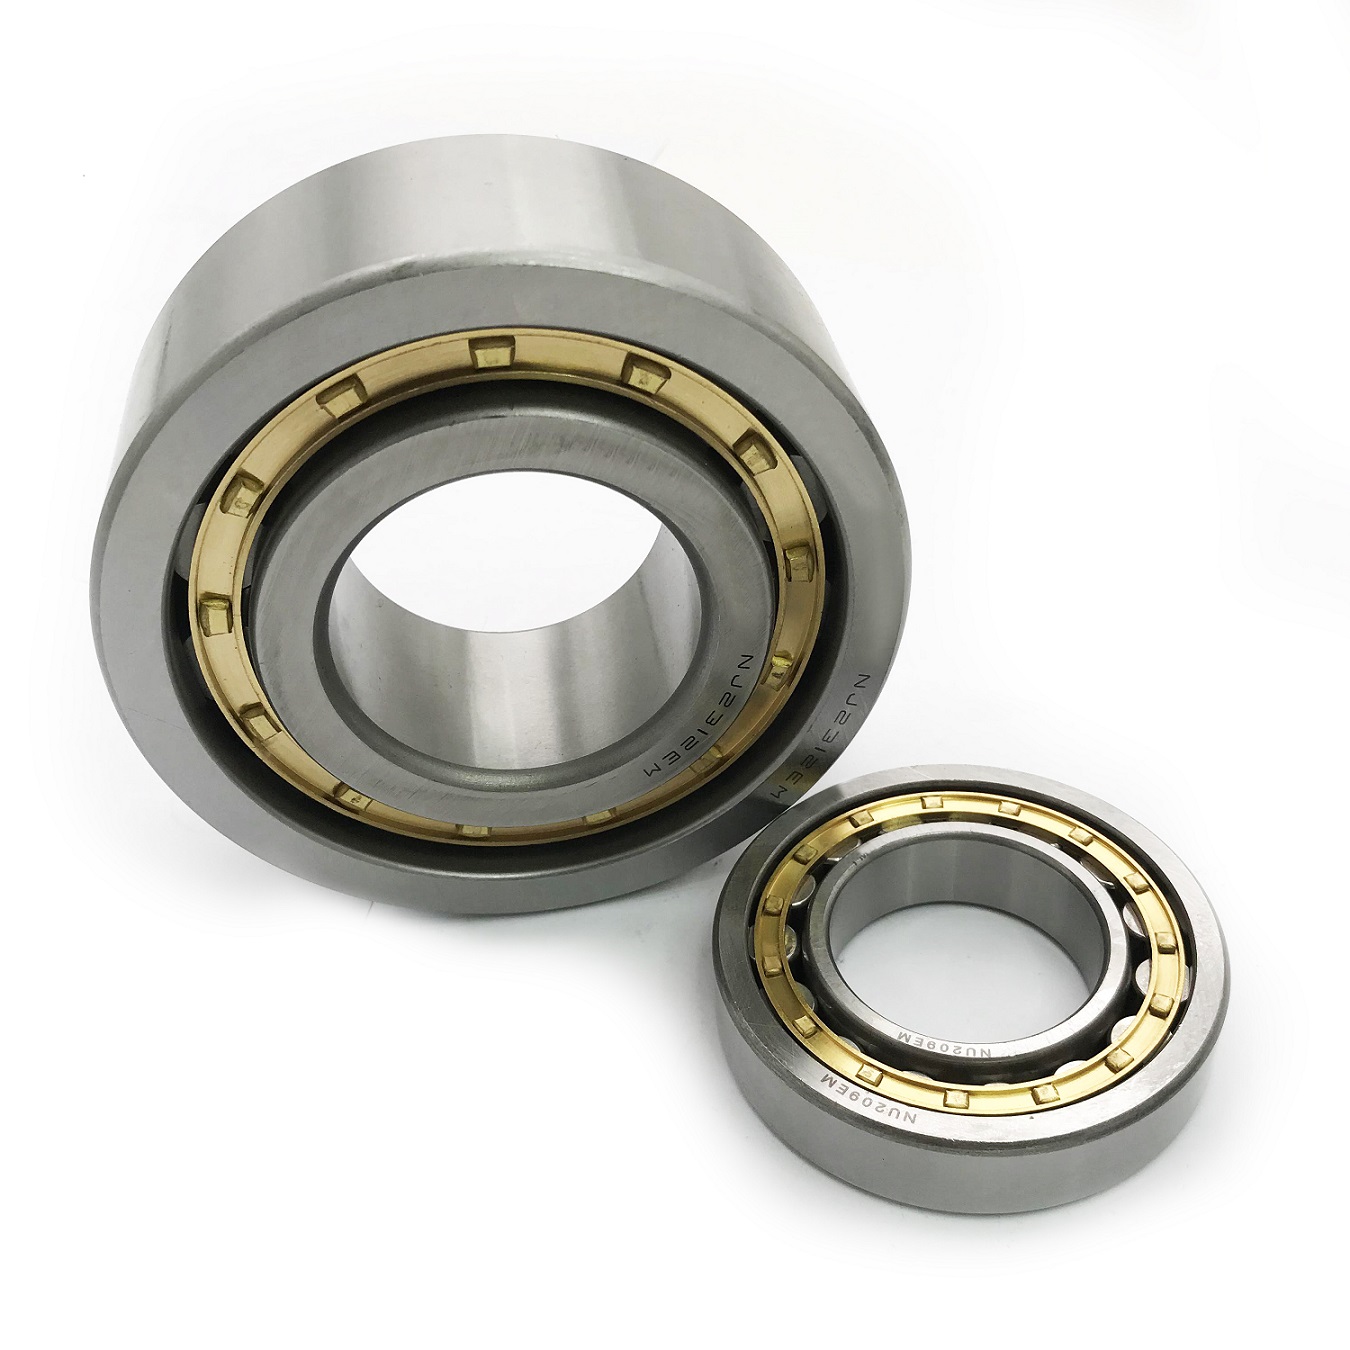 NU205 cylindrical roller bearing